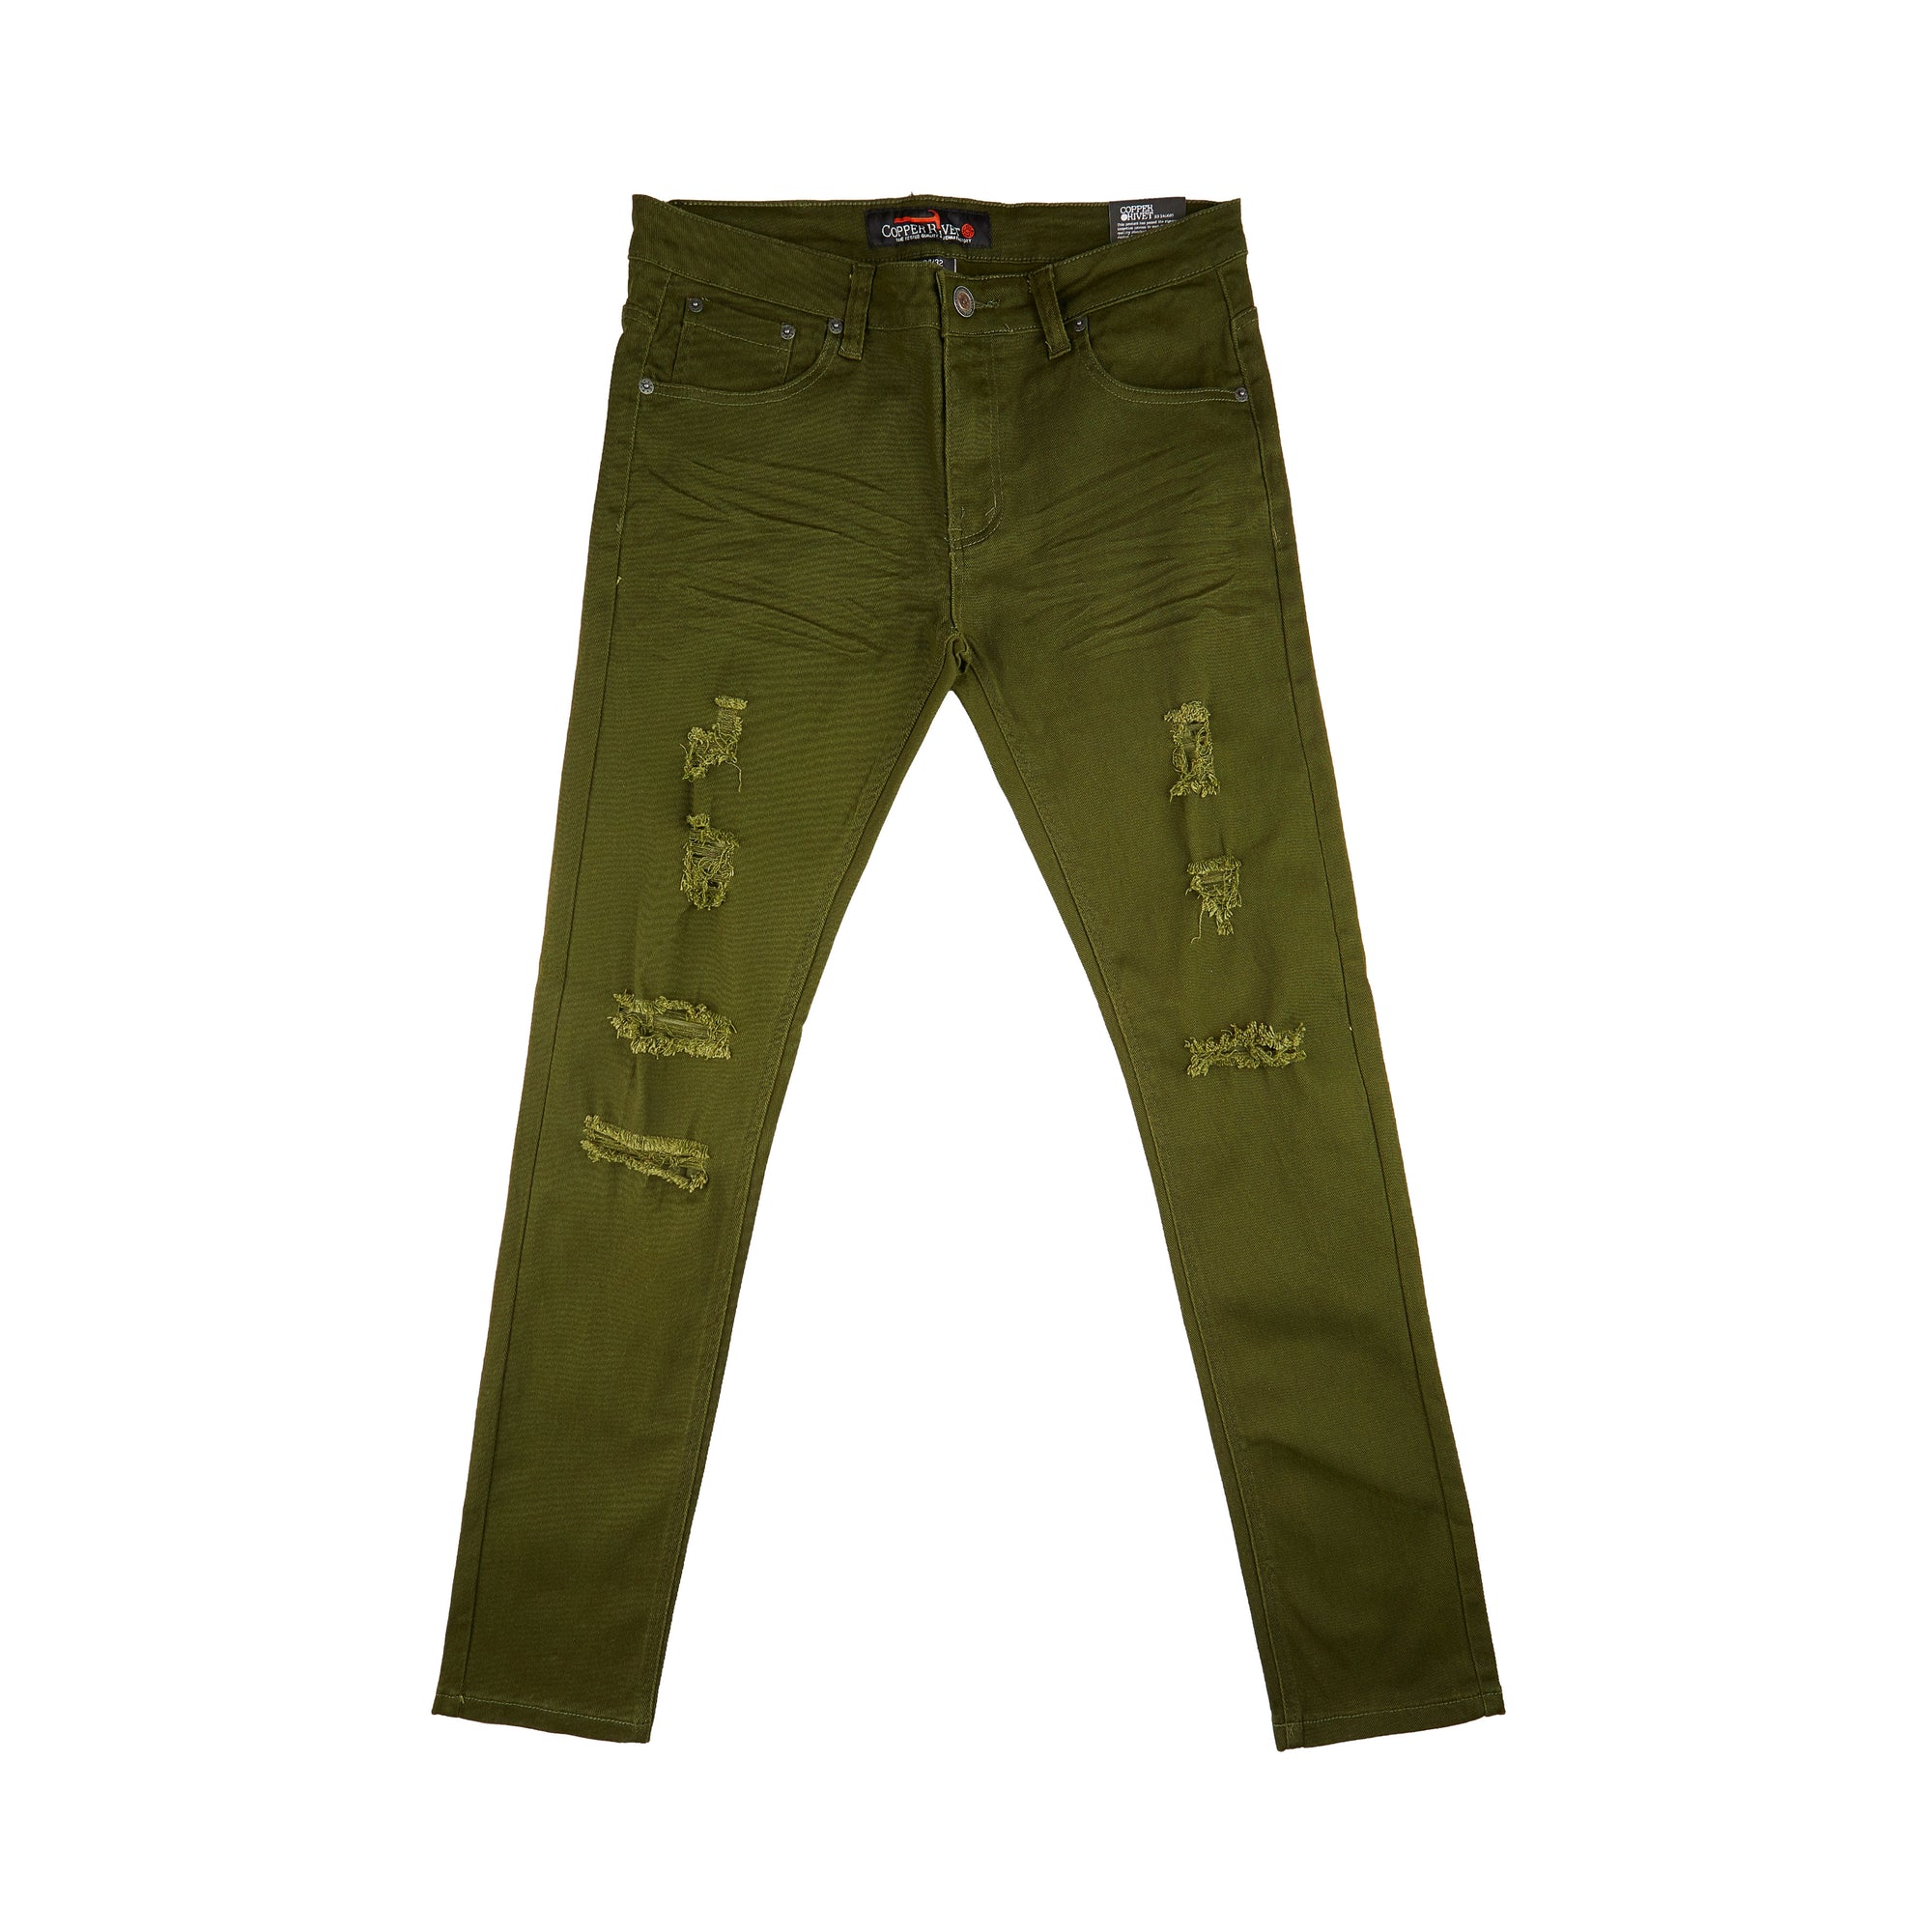 Basic Twill Ripped Jean Pants (Olive)